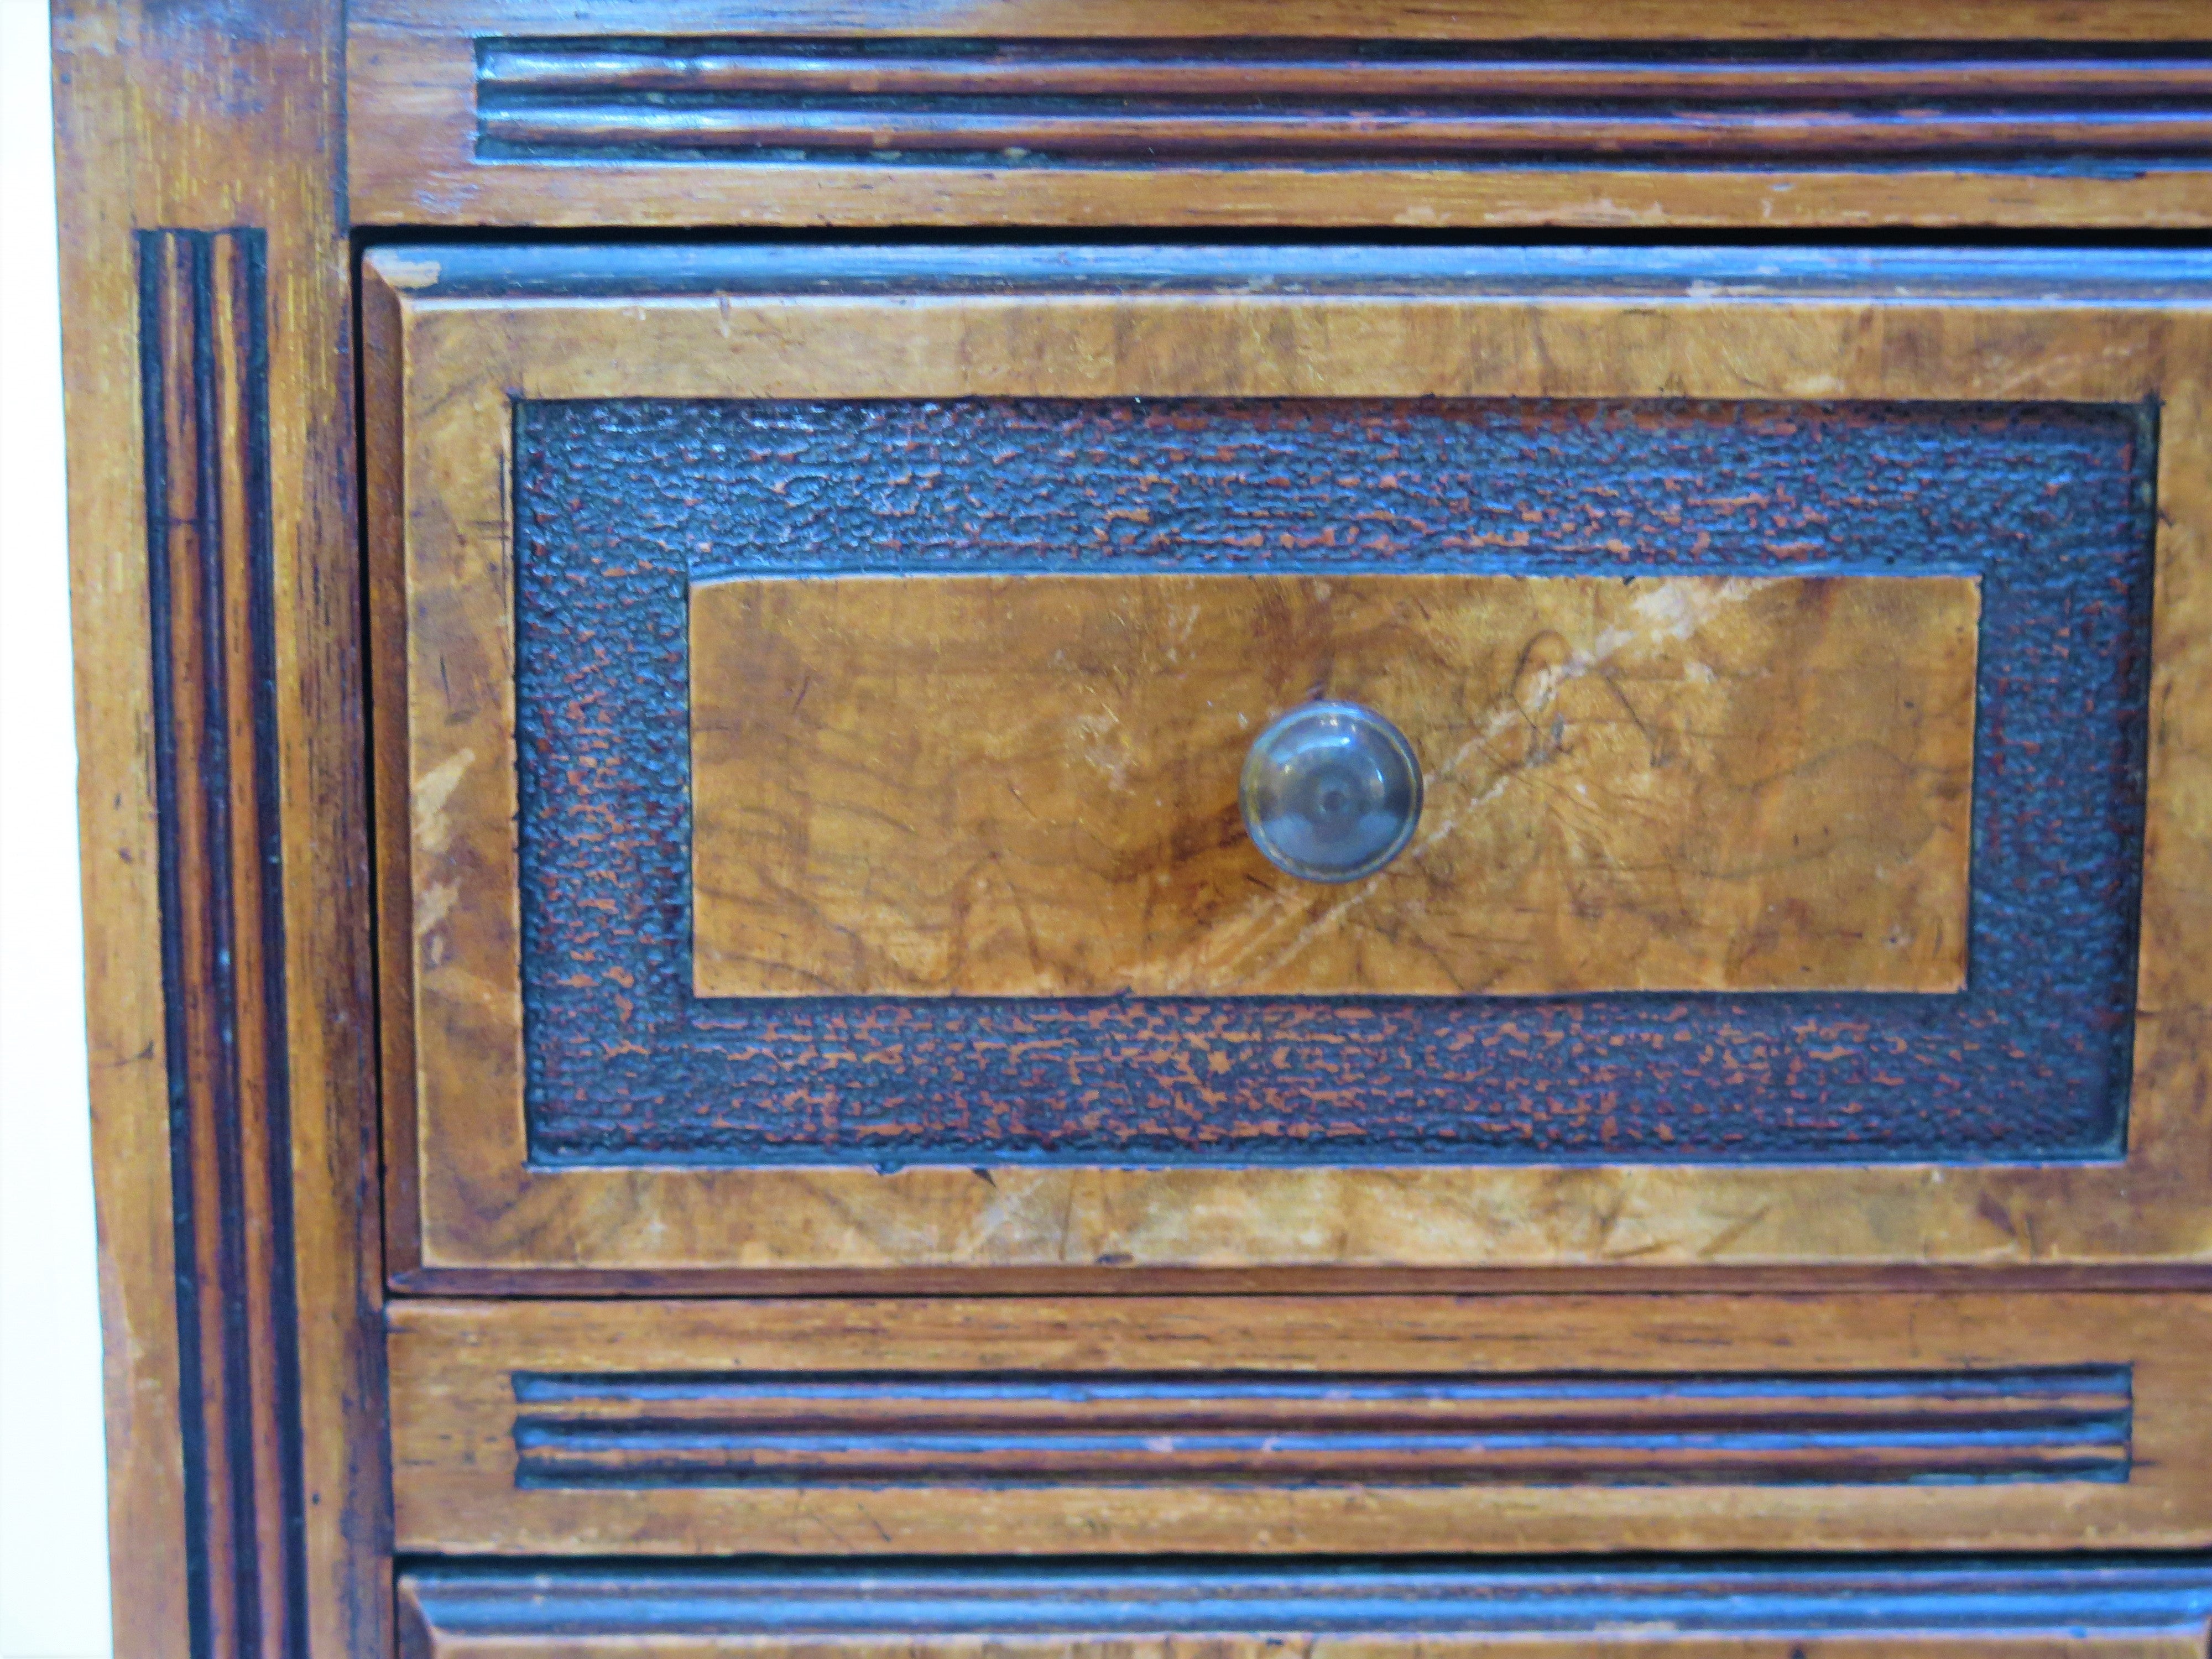 Small Six Drawer Apothecary Chest